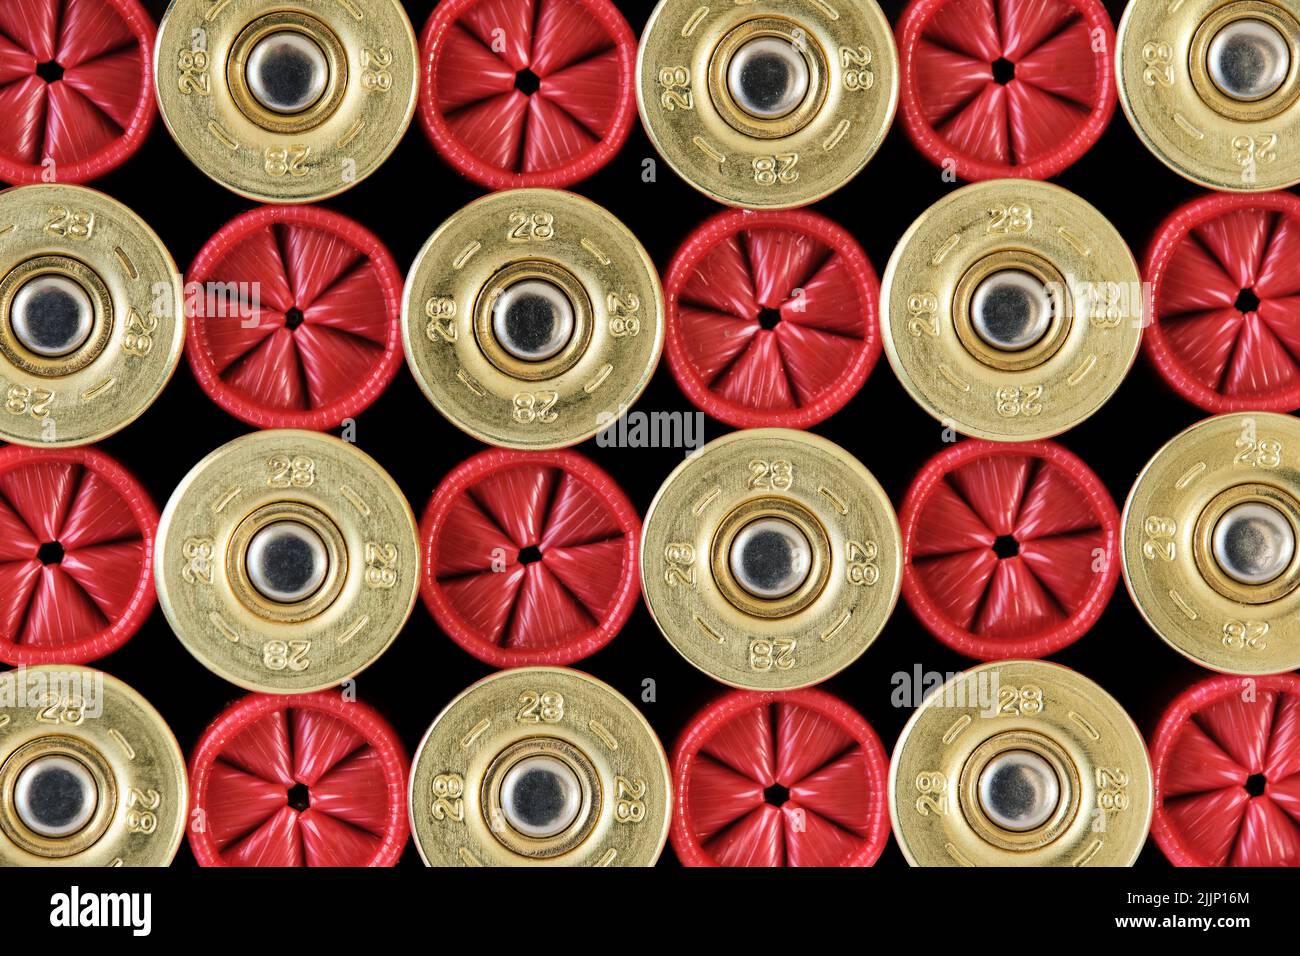 Top view background of red plastic shells for shotgun of 28 caliber arranged together in rows Stock Photo